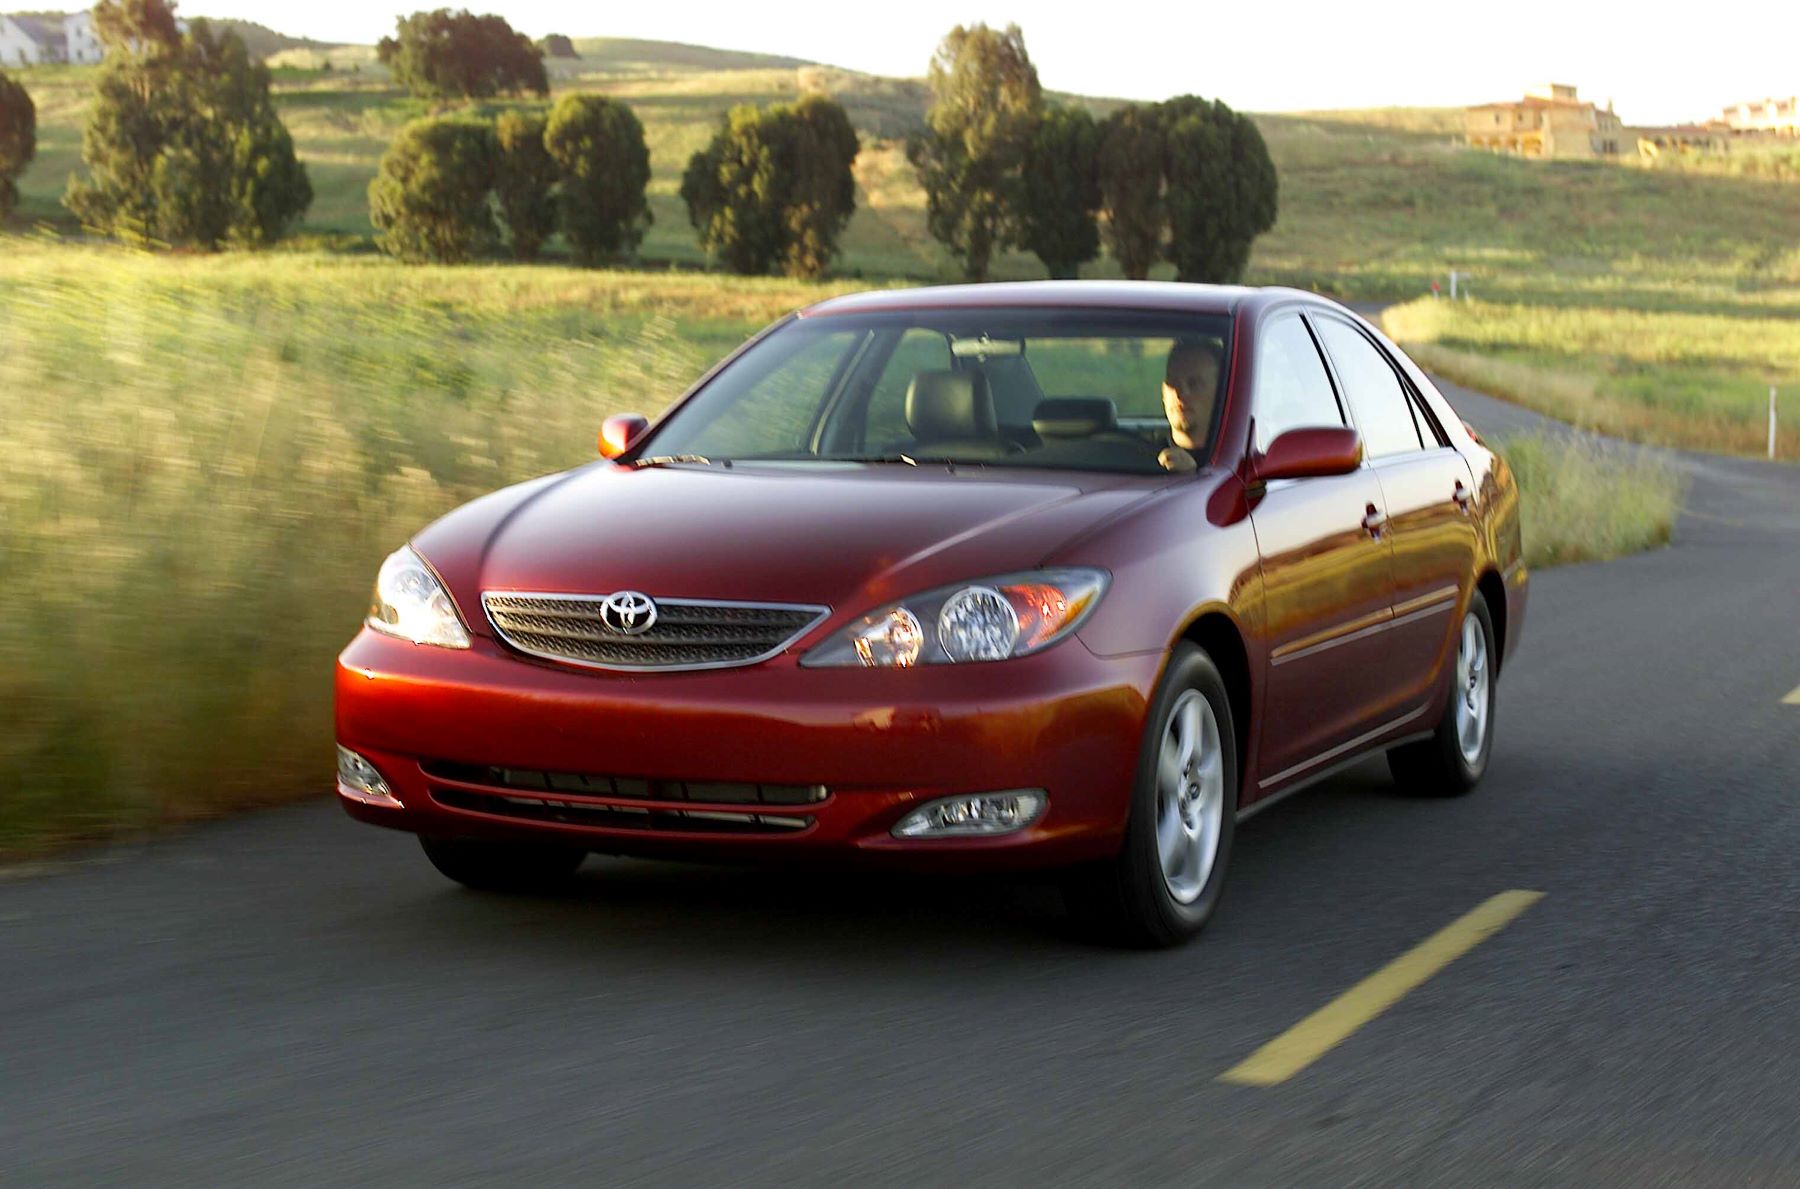 2005 Toyota Camry Prices Reviews  Pictures  CarGurus